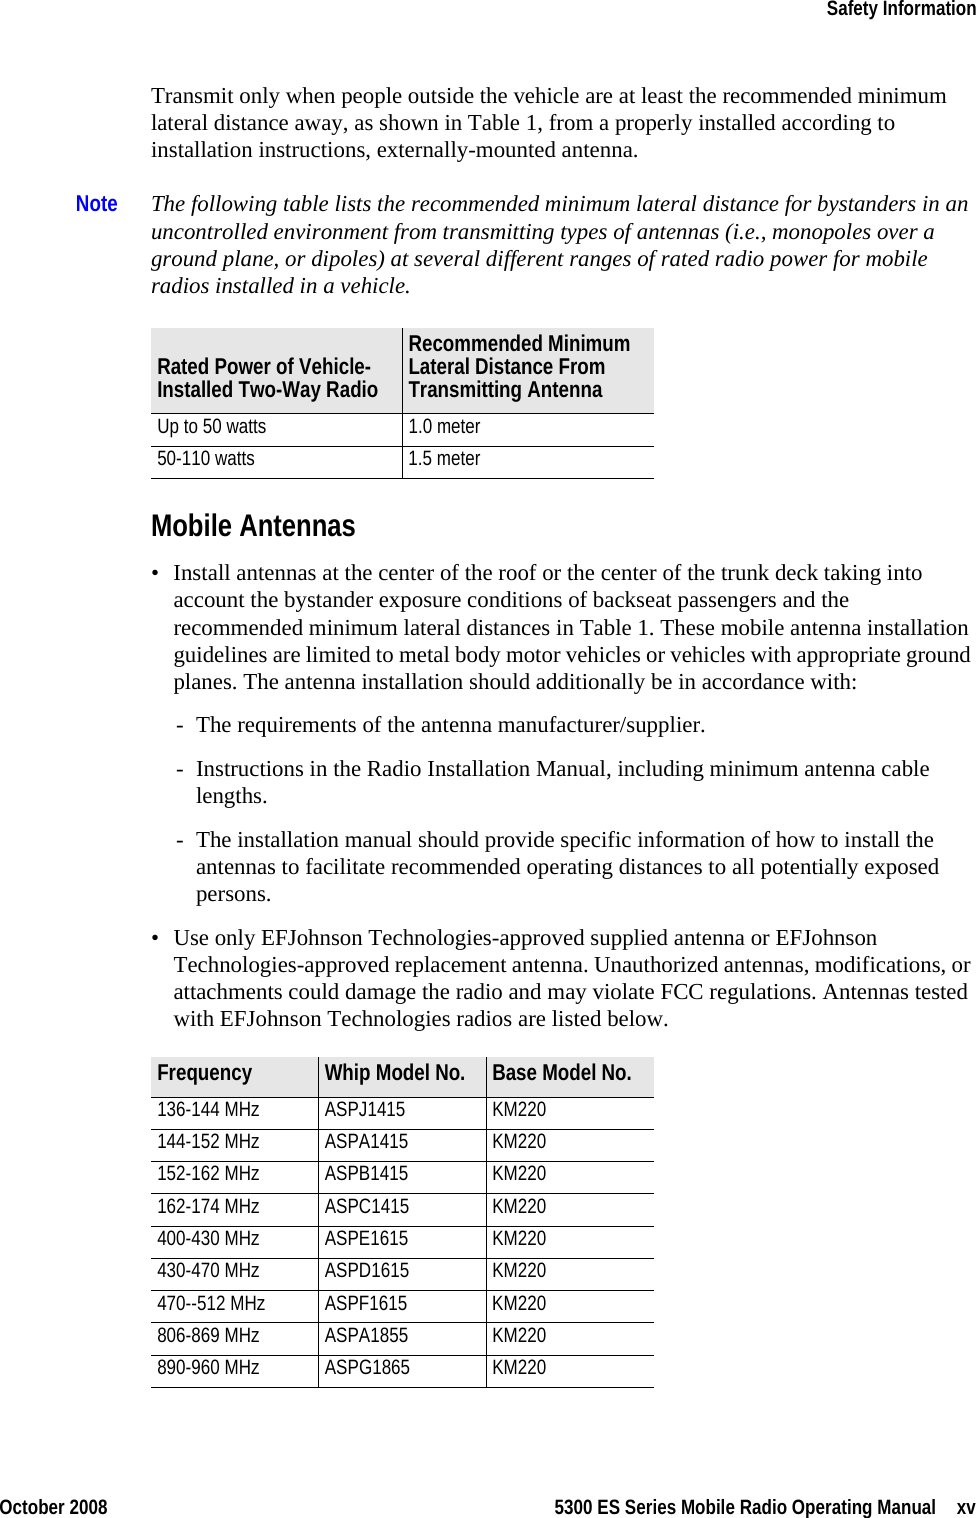 October 2008 5300 ES Series Mobile Radio Operating Manual xvSafety InformationTransmit only when people outside the vehicle are at least the recommended minimum lateral distance away, as shown in Table 1, from a properly installed according to installation instructions, externally-mounted antenna.Note The following table lists the recommended minimum lateral distance for bystanders in an uncontrolled environment from transmitting types of antennas (i.e., monopoles over a ground plane, or dipoles) at several different ranges of rated radio power for mobile radios installed in a vehicle.Mobile Antennas• Install antennas at the center of the roof or the center of the trunk deck taking into account the bystander exposure conditions of backseat passengers and the recommended minimum lateral distances in Table 1. These mobile antenna installation guidelines are limited to metal body motor vehicles or vehicles with appropriate ground planes. The antenna installation should additionally be in accordance with:- The requirements of the antenna manufacturer/supplier.- Instructions in the Radio Installation Manual, including minimum antenna cable lengths.- The installation manual should provide specific information of how to install the antennas to facilitate recommended operating distances to all potentially exposed persons.• Use only EFJohnson Technologies-approved supplied antenna or EFJohnson Technologies-approved replacement antenna. Unauthorized antennas, modifications, or attachments could damage the radio and may violate FCC regulations. Antennas tested with EFJohnson Technologies radios are listed below.Rated Power of Vehicle-Installed Two-Way RadioRecommended Minimum Lateral Distance From Transmitting AntennaUp to 50 watts 1.0 meter50-110 watts 1.5 meterFrequency Whip Model No. Base Model No.136-144 MHz ASPJ1415 KM220144-152 MHz ASPA1415 KM220152-162 MHz ASPB1415 KM220162-174 MHz ASPC1415 KM220400-430 MHz ASPE1615 KM220430-470 MHz ASPD1615 KM220470--512 MHz ASPF1615 KM220806-869 MHz ASPA1855 KM220890-960 MHz ASPG1865 KM220